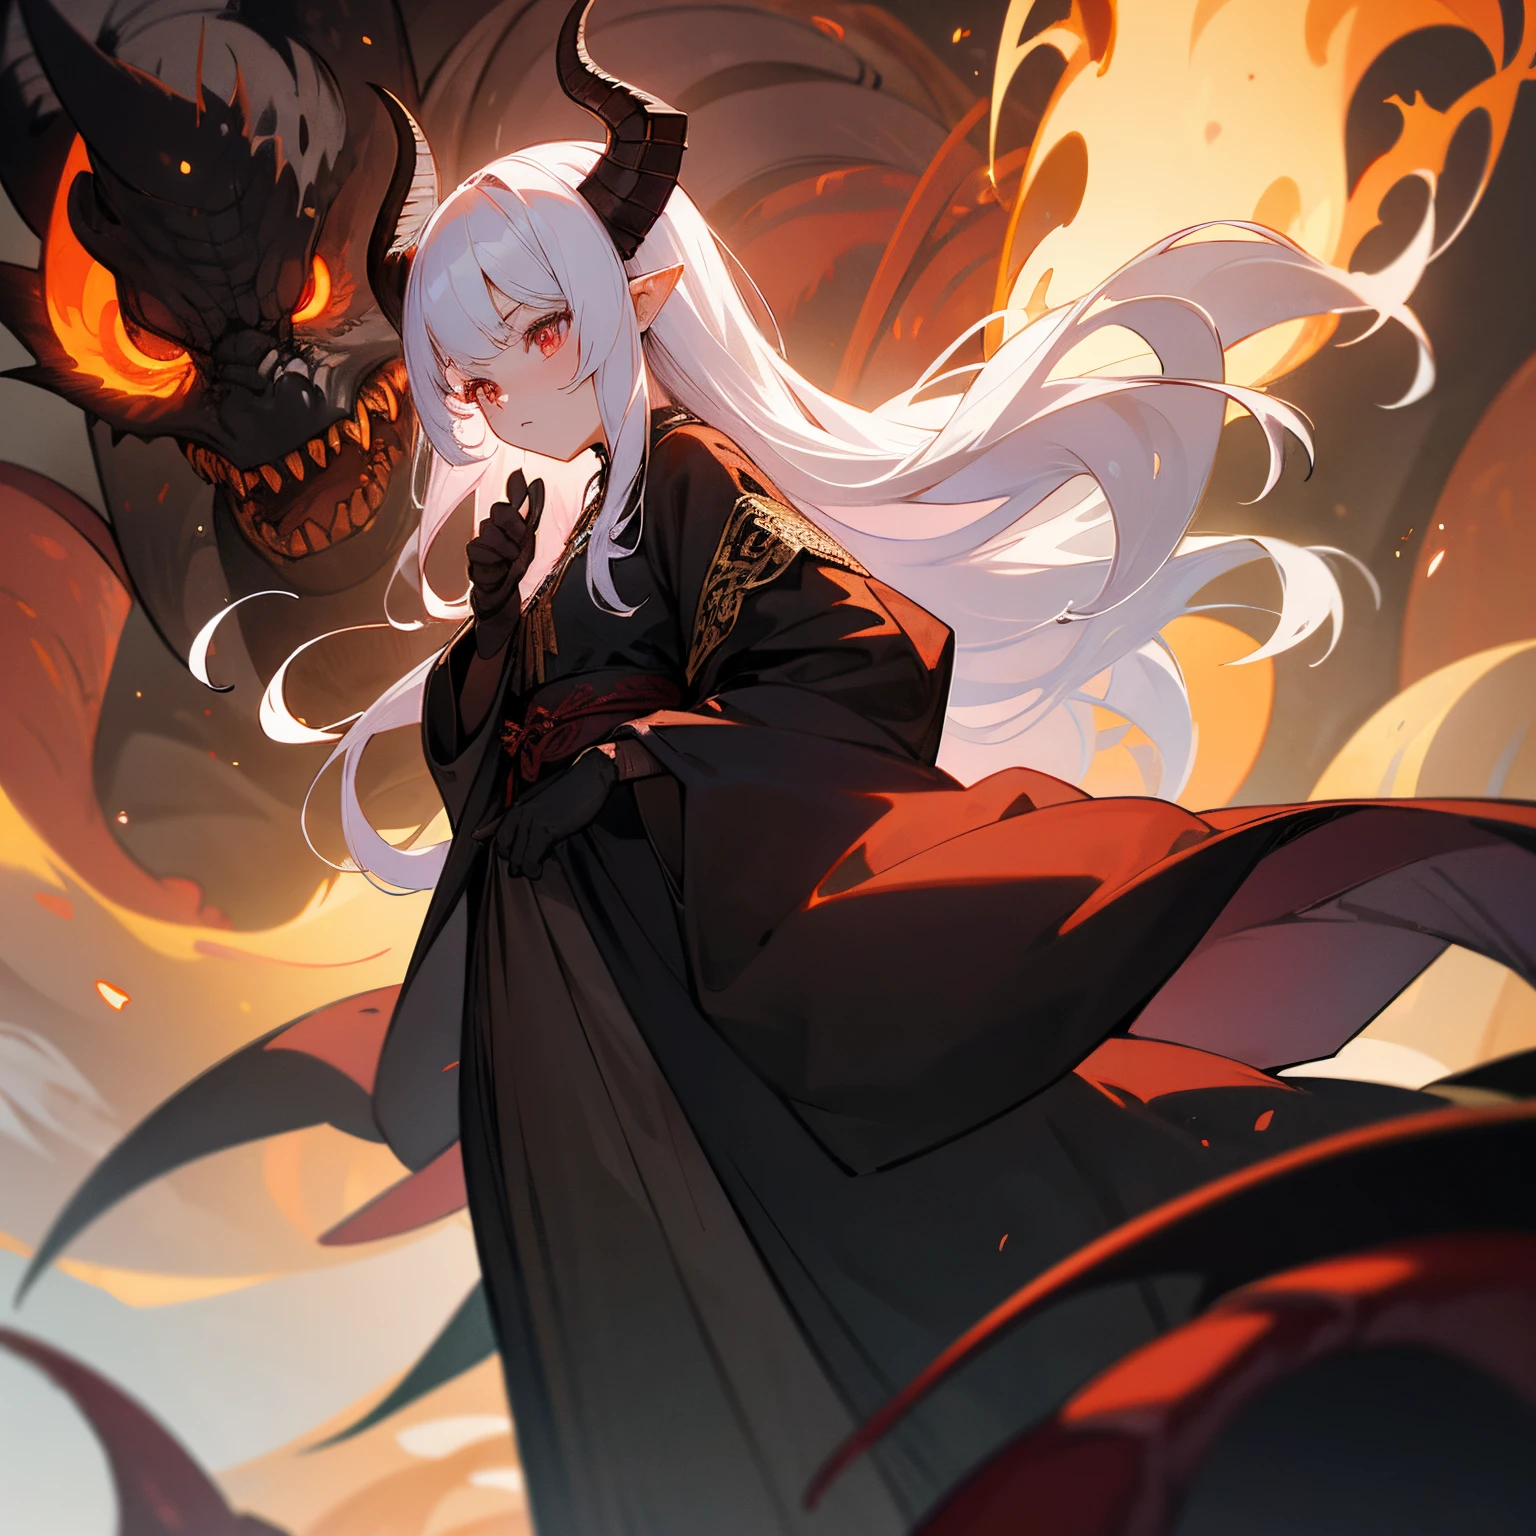 A young girl, with poor milk, with golden eyes burning like flames, little pointy ears like fairies, long pure white hair blowing in the wind, black dragon horns on her head, a sorcerer's dress, wearing black lace gloves, a wide robe sleeve to hide her hands, a golden pattern at the edge of the robe, and a black dragon tail behind her, A multitude of blood-red tentacles protrude from the sleeves of his clothes, Behind the girl was the shadow of a Cthulhu god, and nearby there were a large number of dense tentacles with eyes and flames flying around the girl